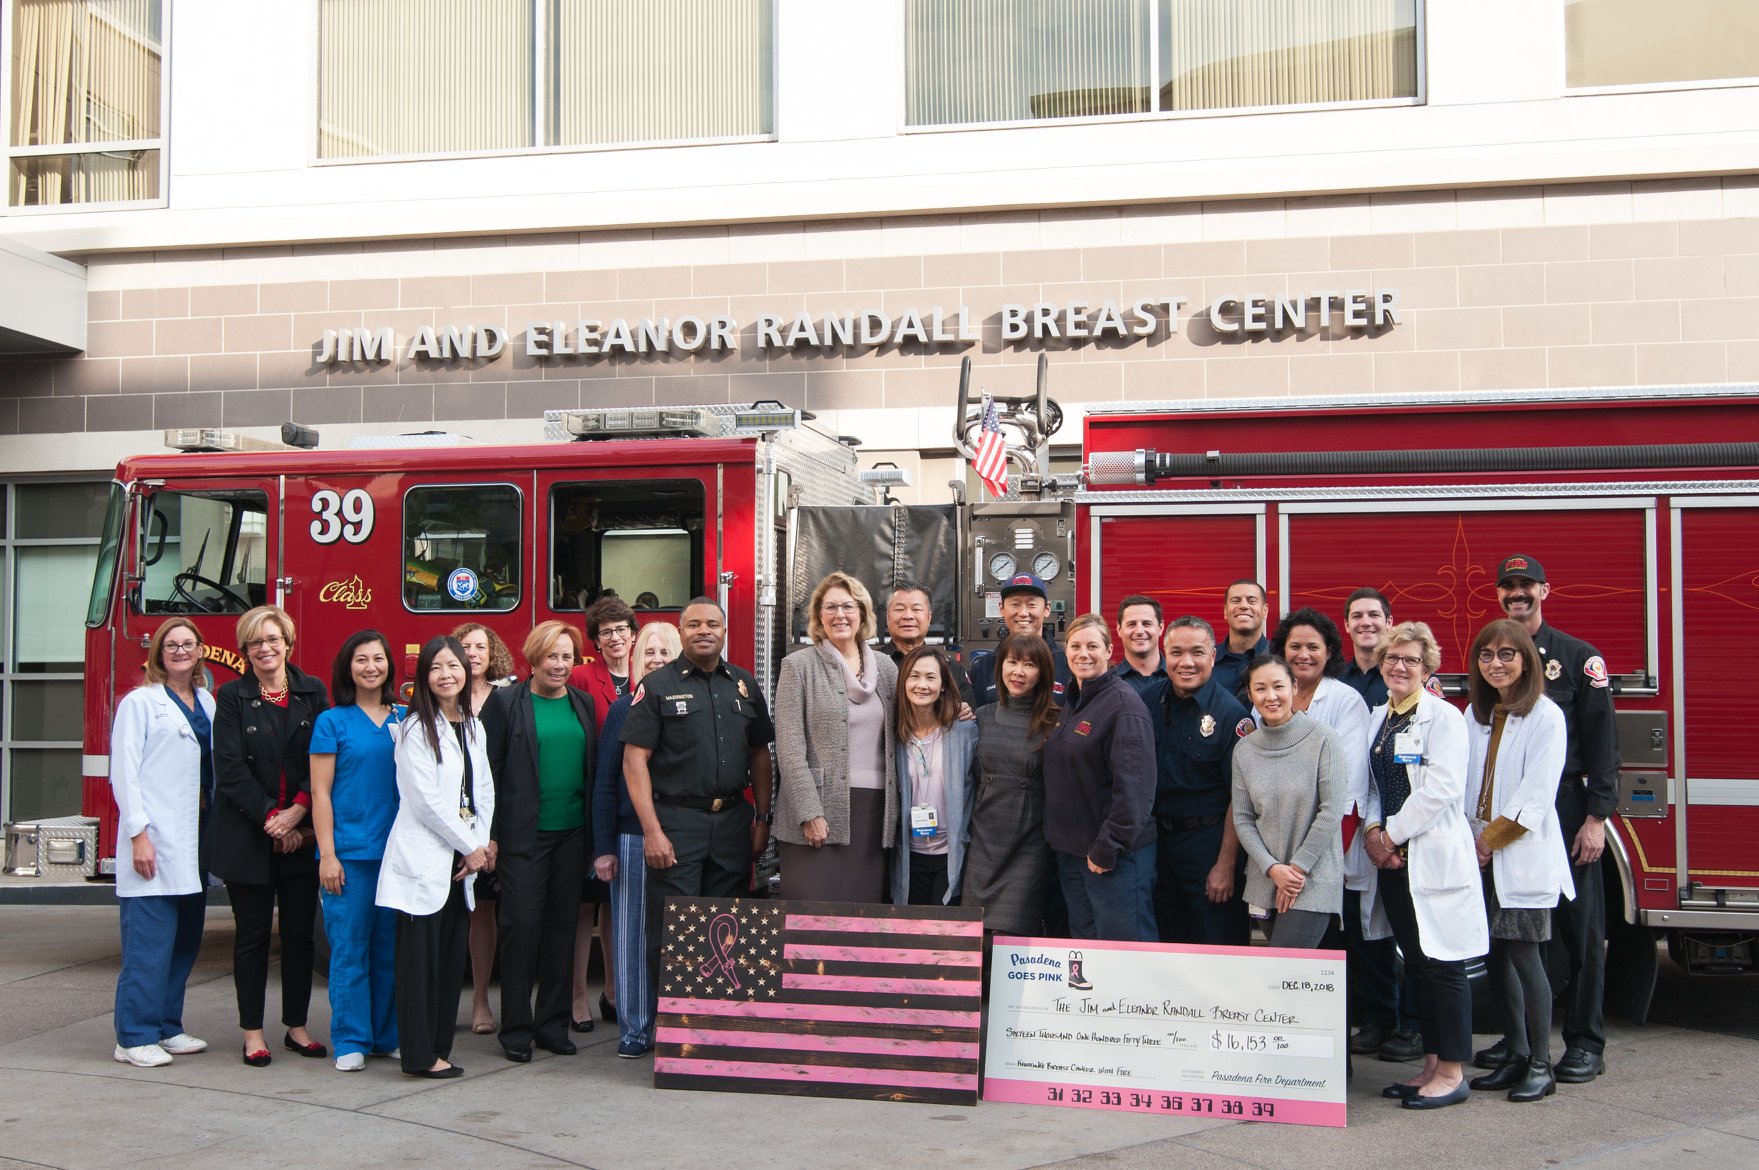 Pasadena Fire Department’s “Pasadena Goes Pink” fundraising donates over $16,000 to the Jim and Eleanor Randall Breast Center